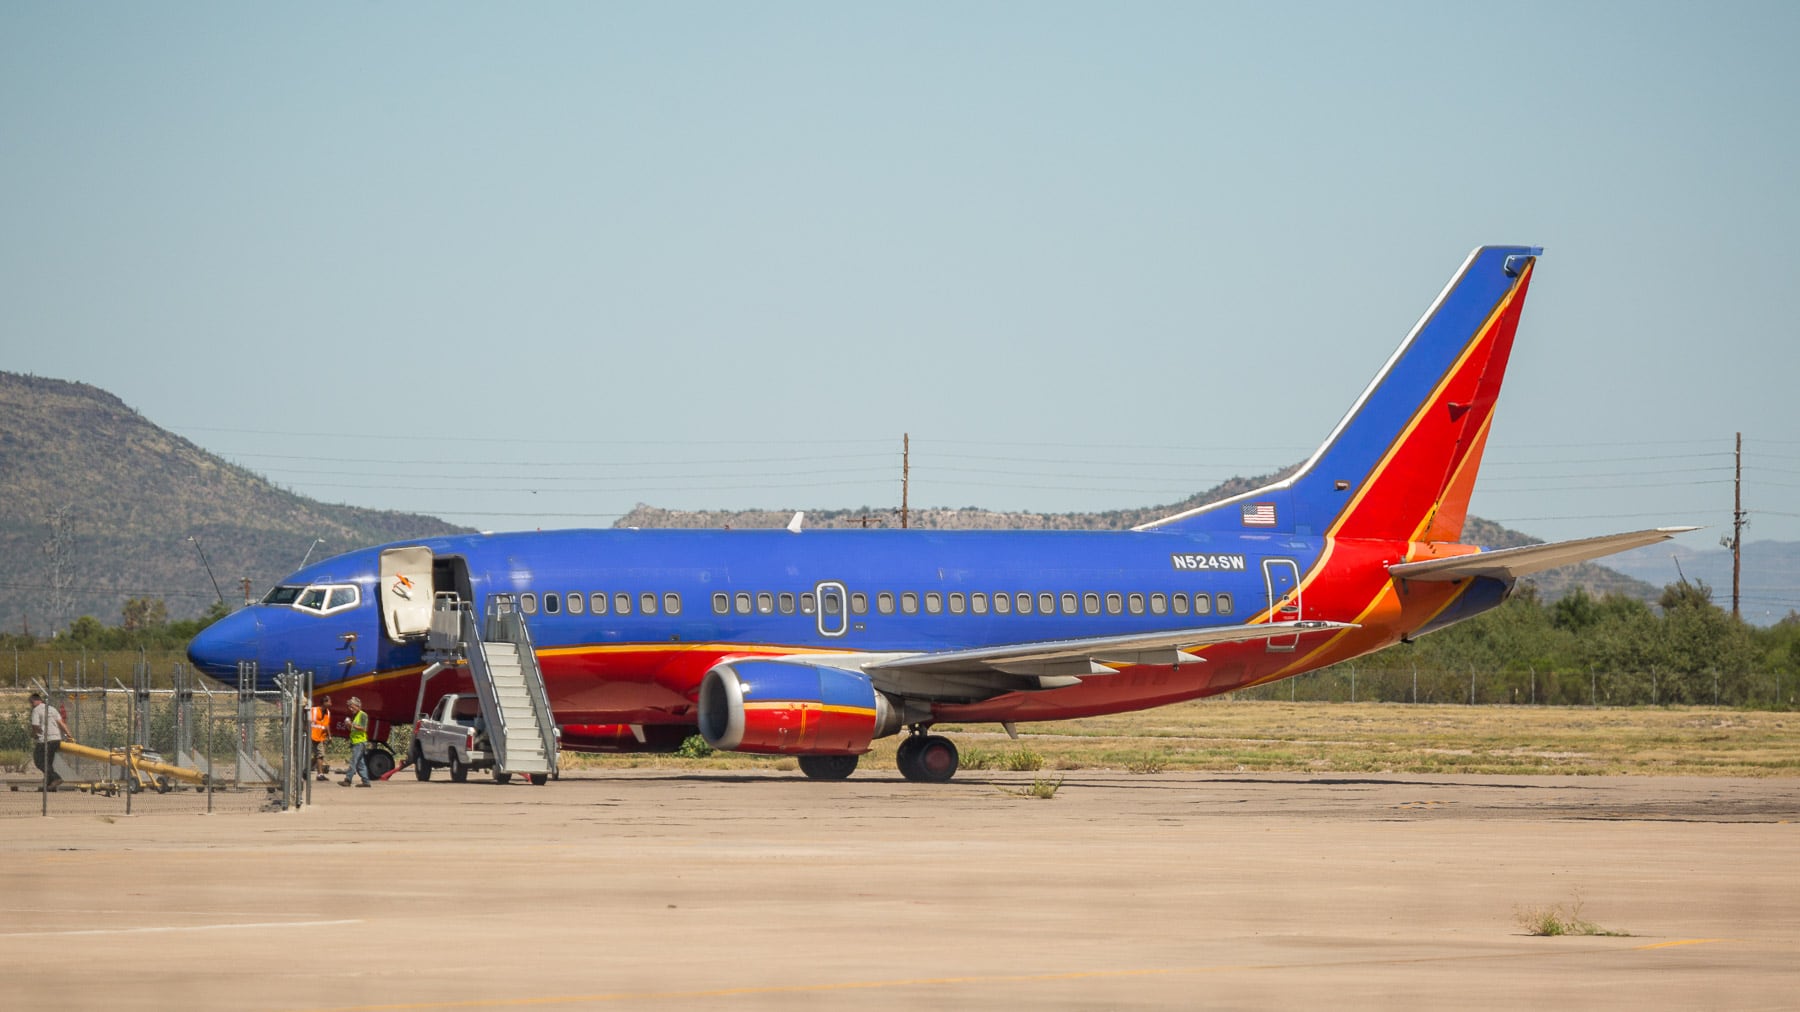 Southwest at her final journey in Arizona.